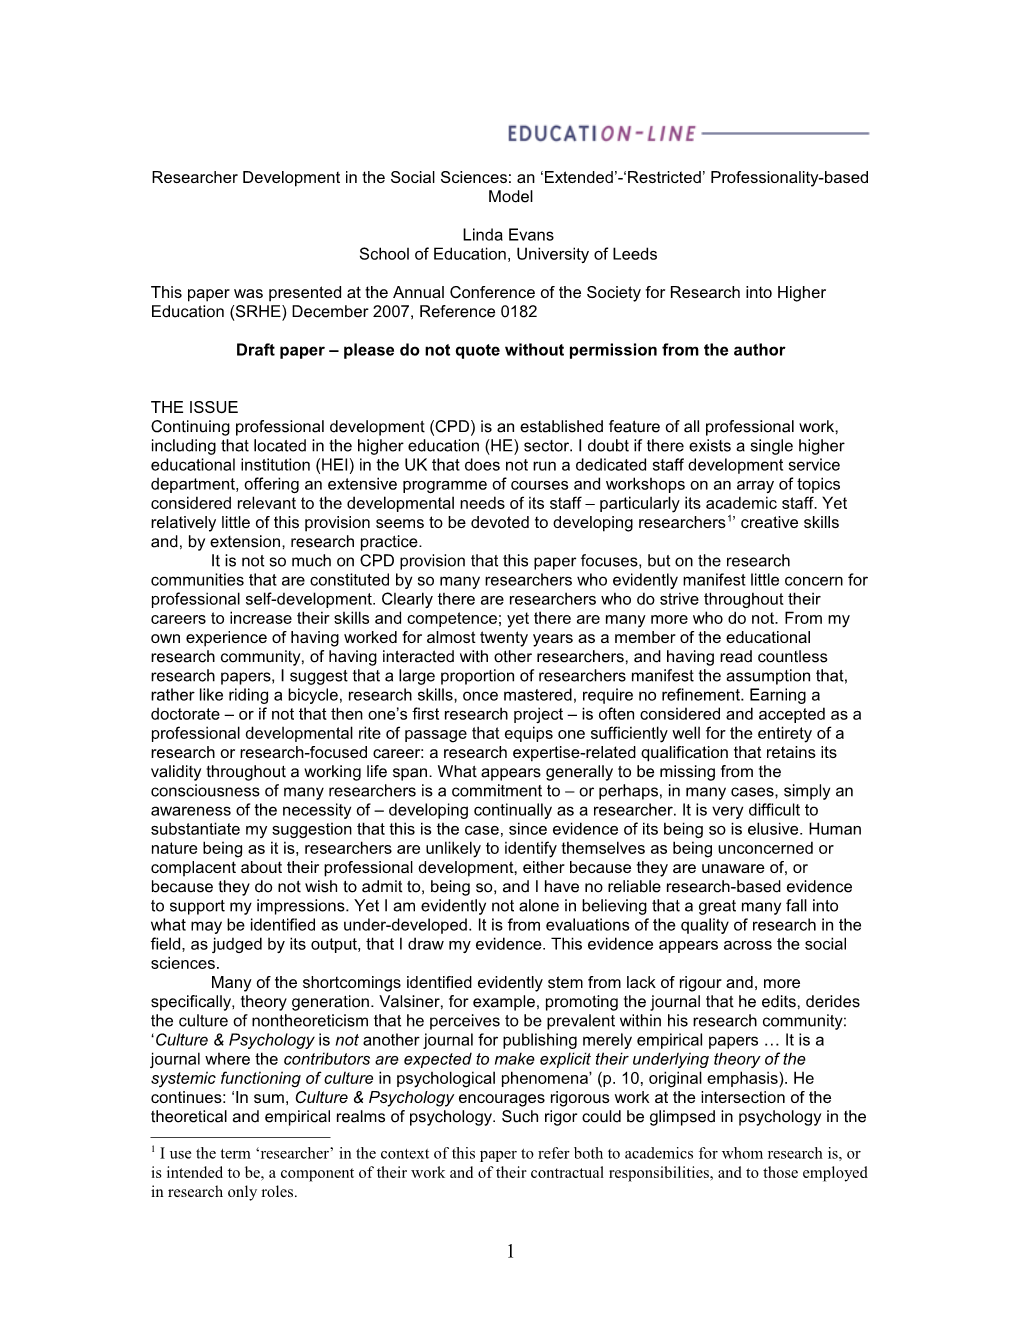 Researcher Development in the Social Sciences: an Extended - Restricted Professionality-Based